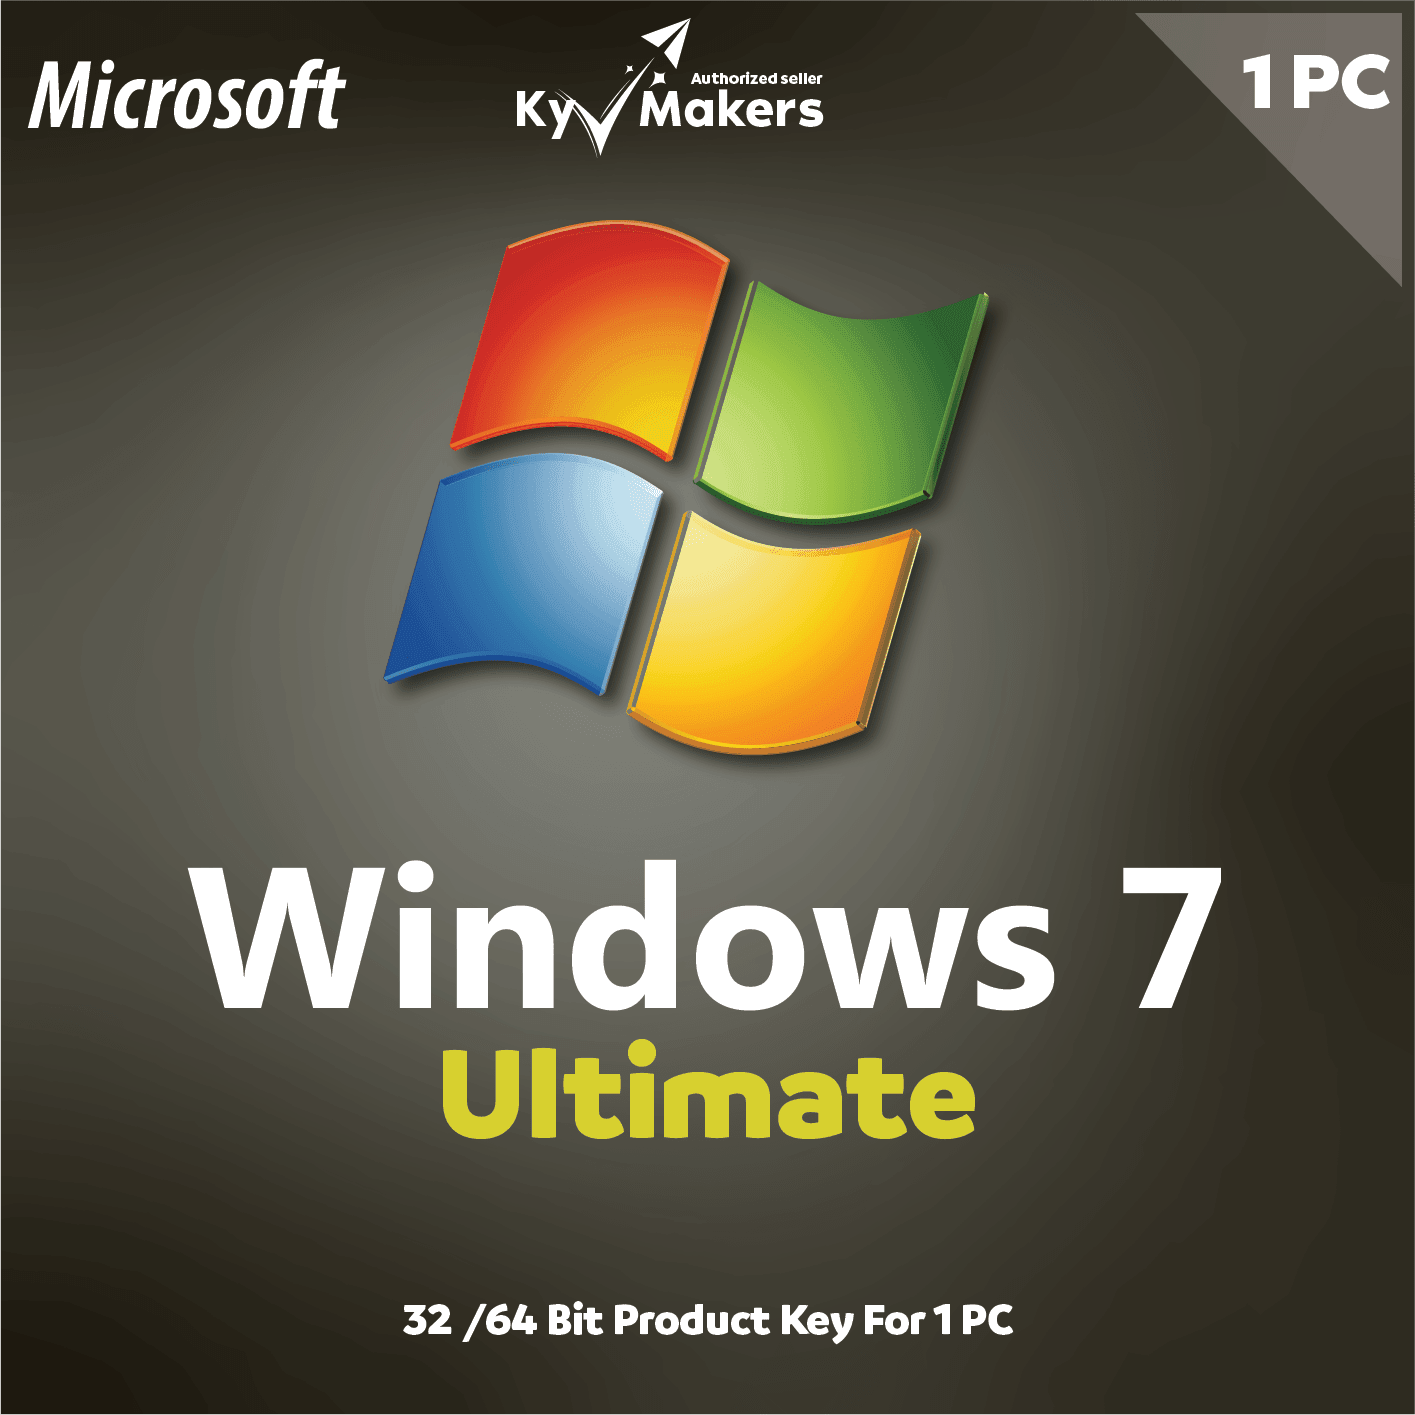 Microsoft Windows 7 Ultimate Product Key | Lifetime Activation for 1 PC